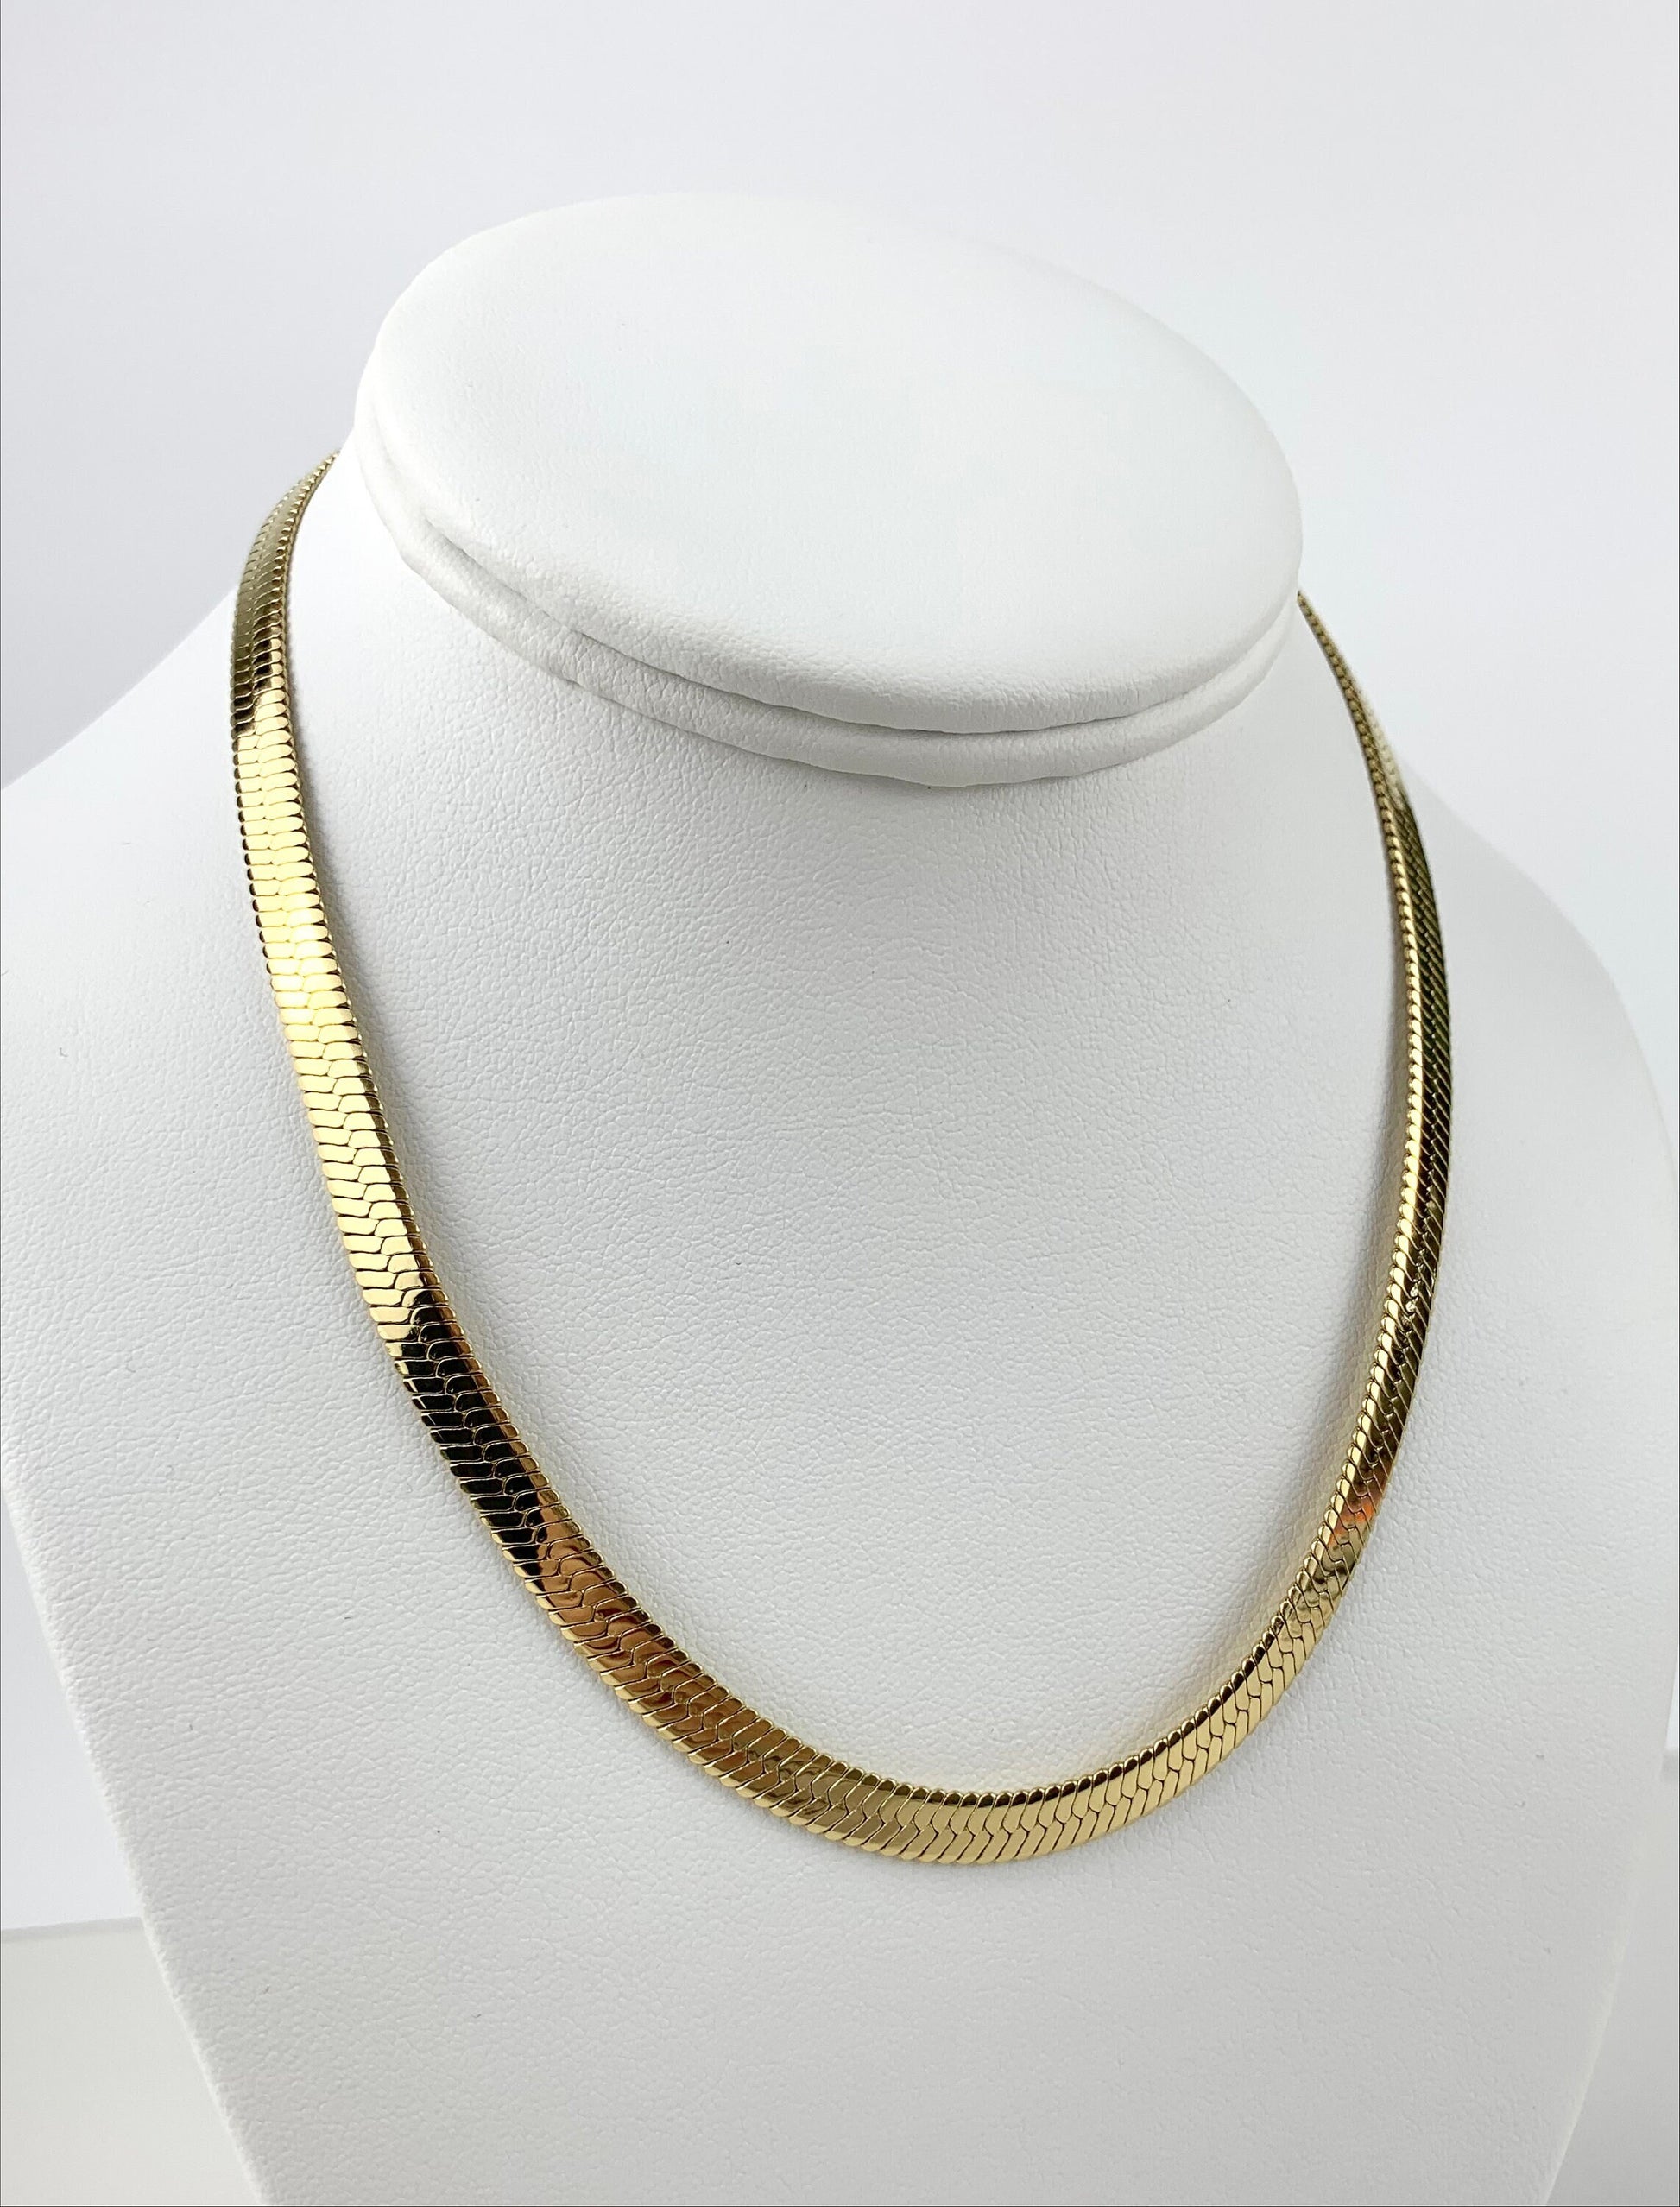 14k Gold Filled Herringbone Snake Chain 6mm Chain, Bracelet or Anklet for Wholesale Jewelry Making Supplies